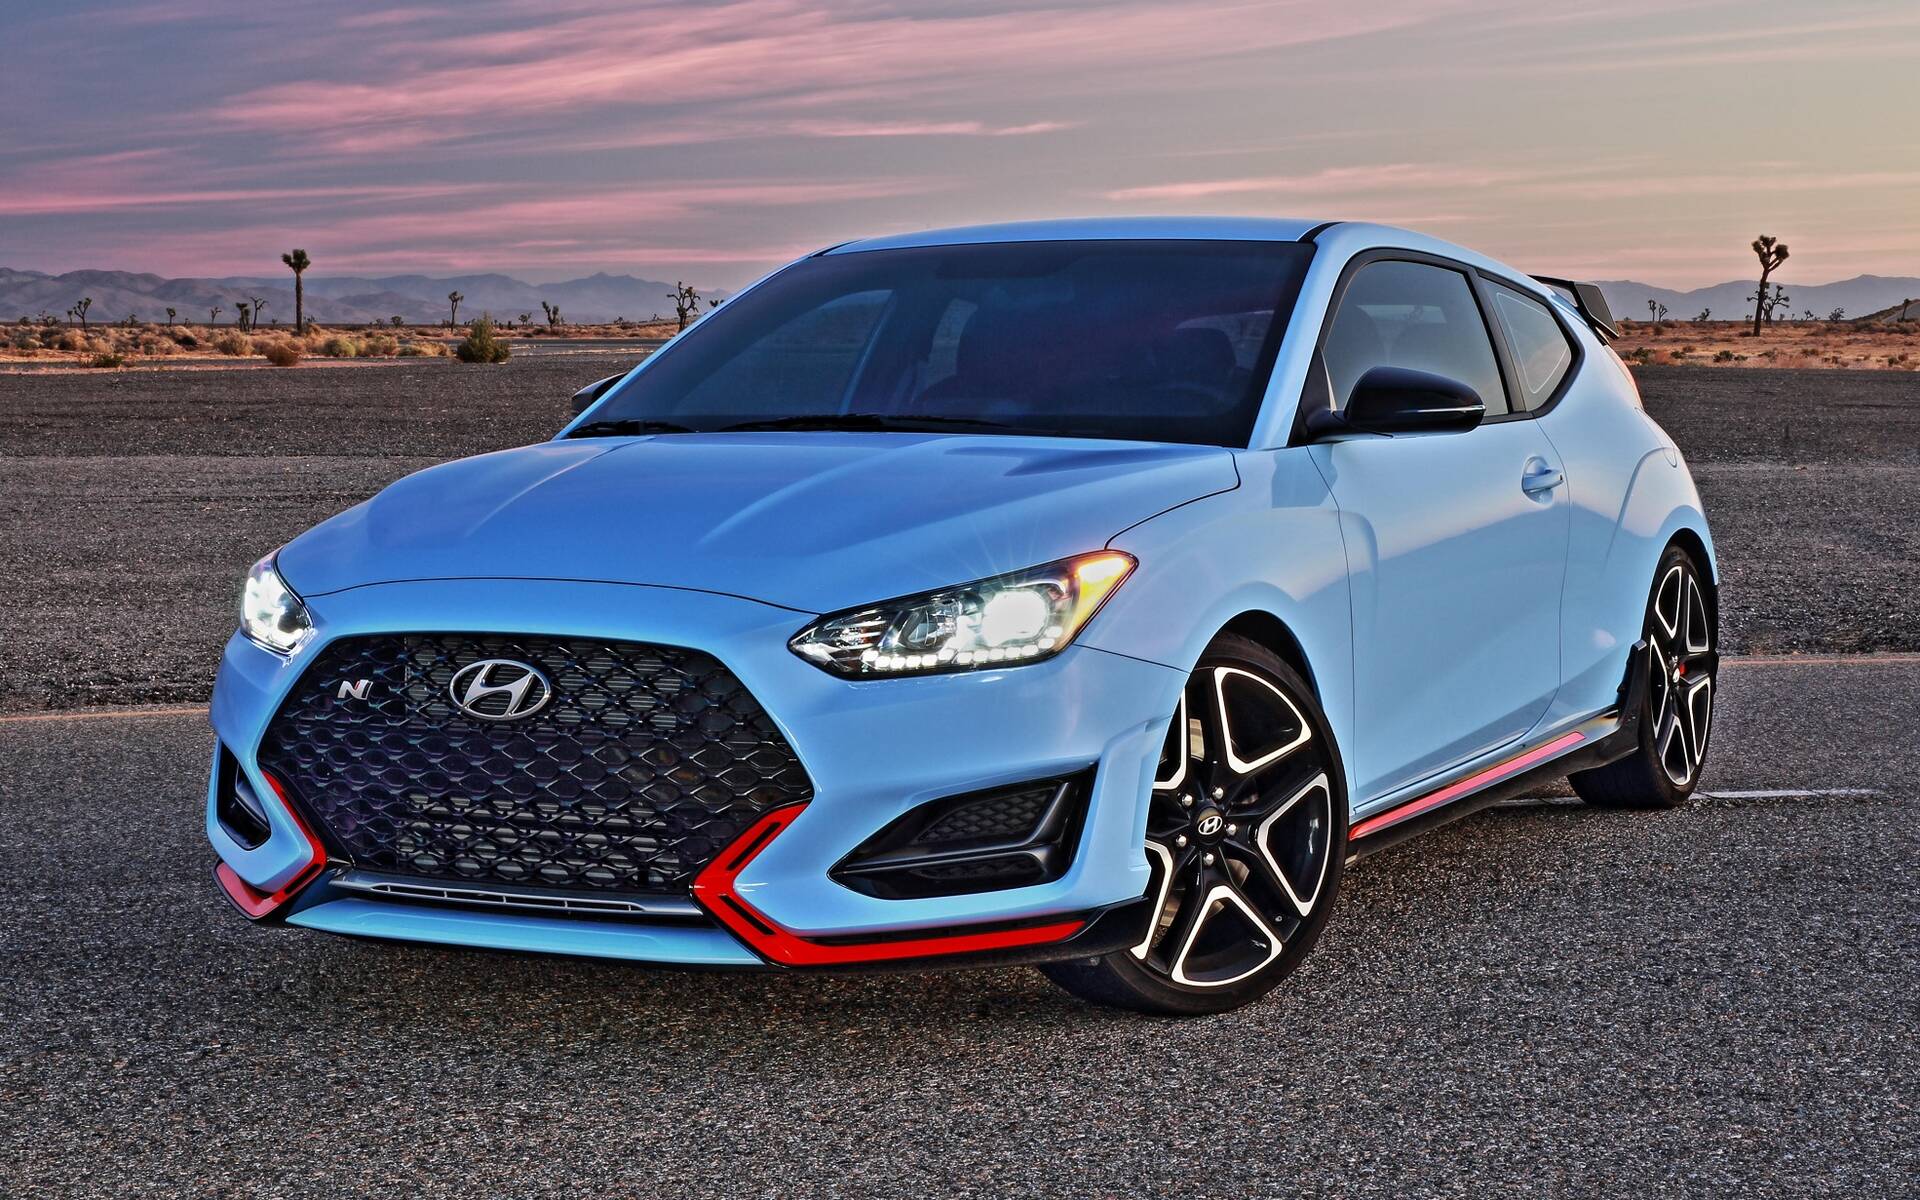 2022 Hyundai Veloster N DCT Specifications The Car Guide